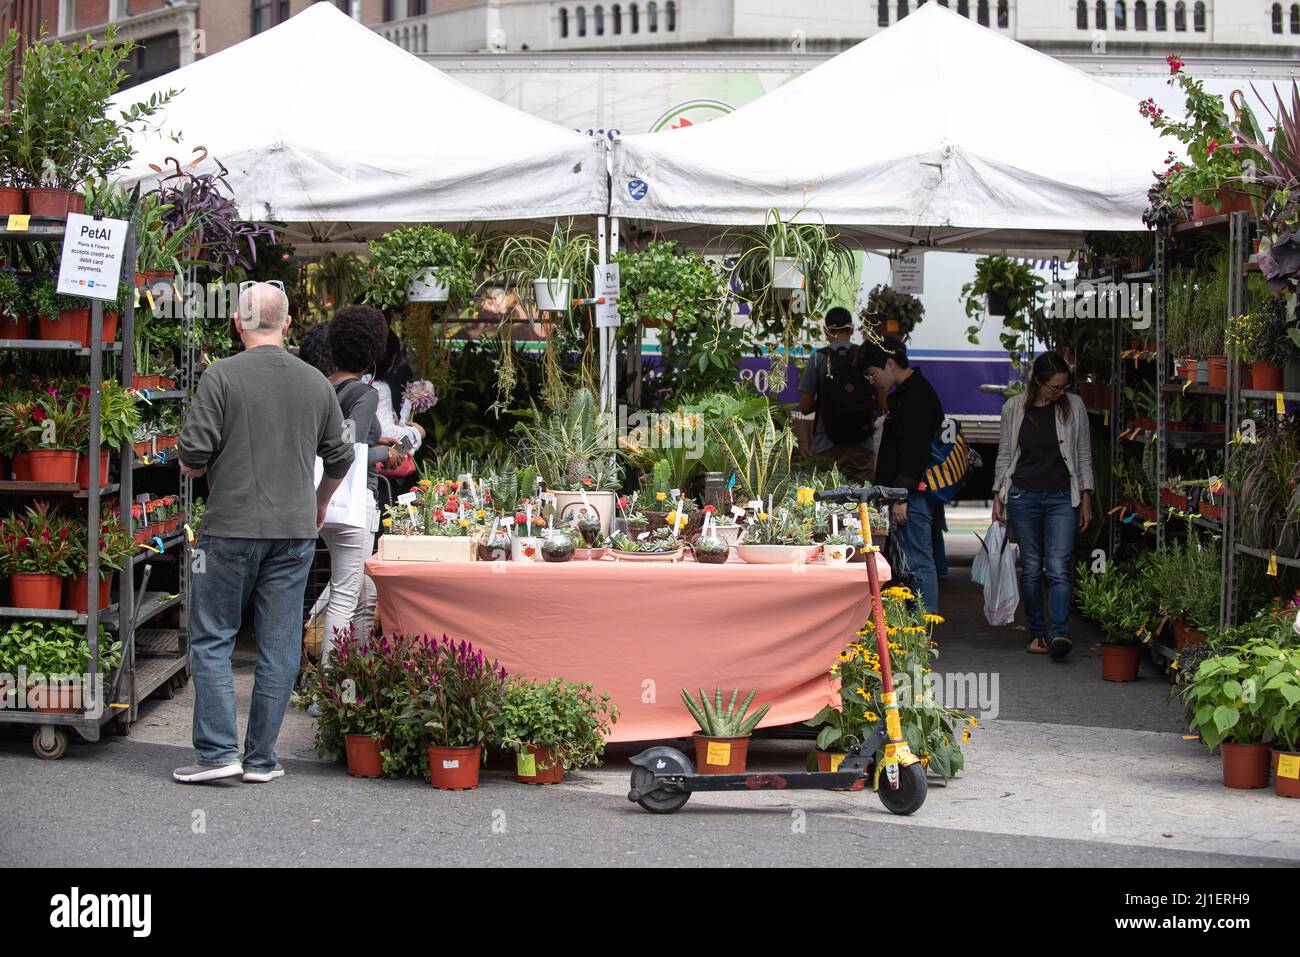 Sunday scenes from the Union Square Farmer's Market in New York City. Stock Photo